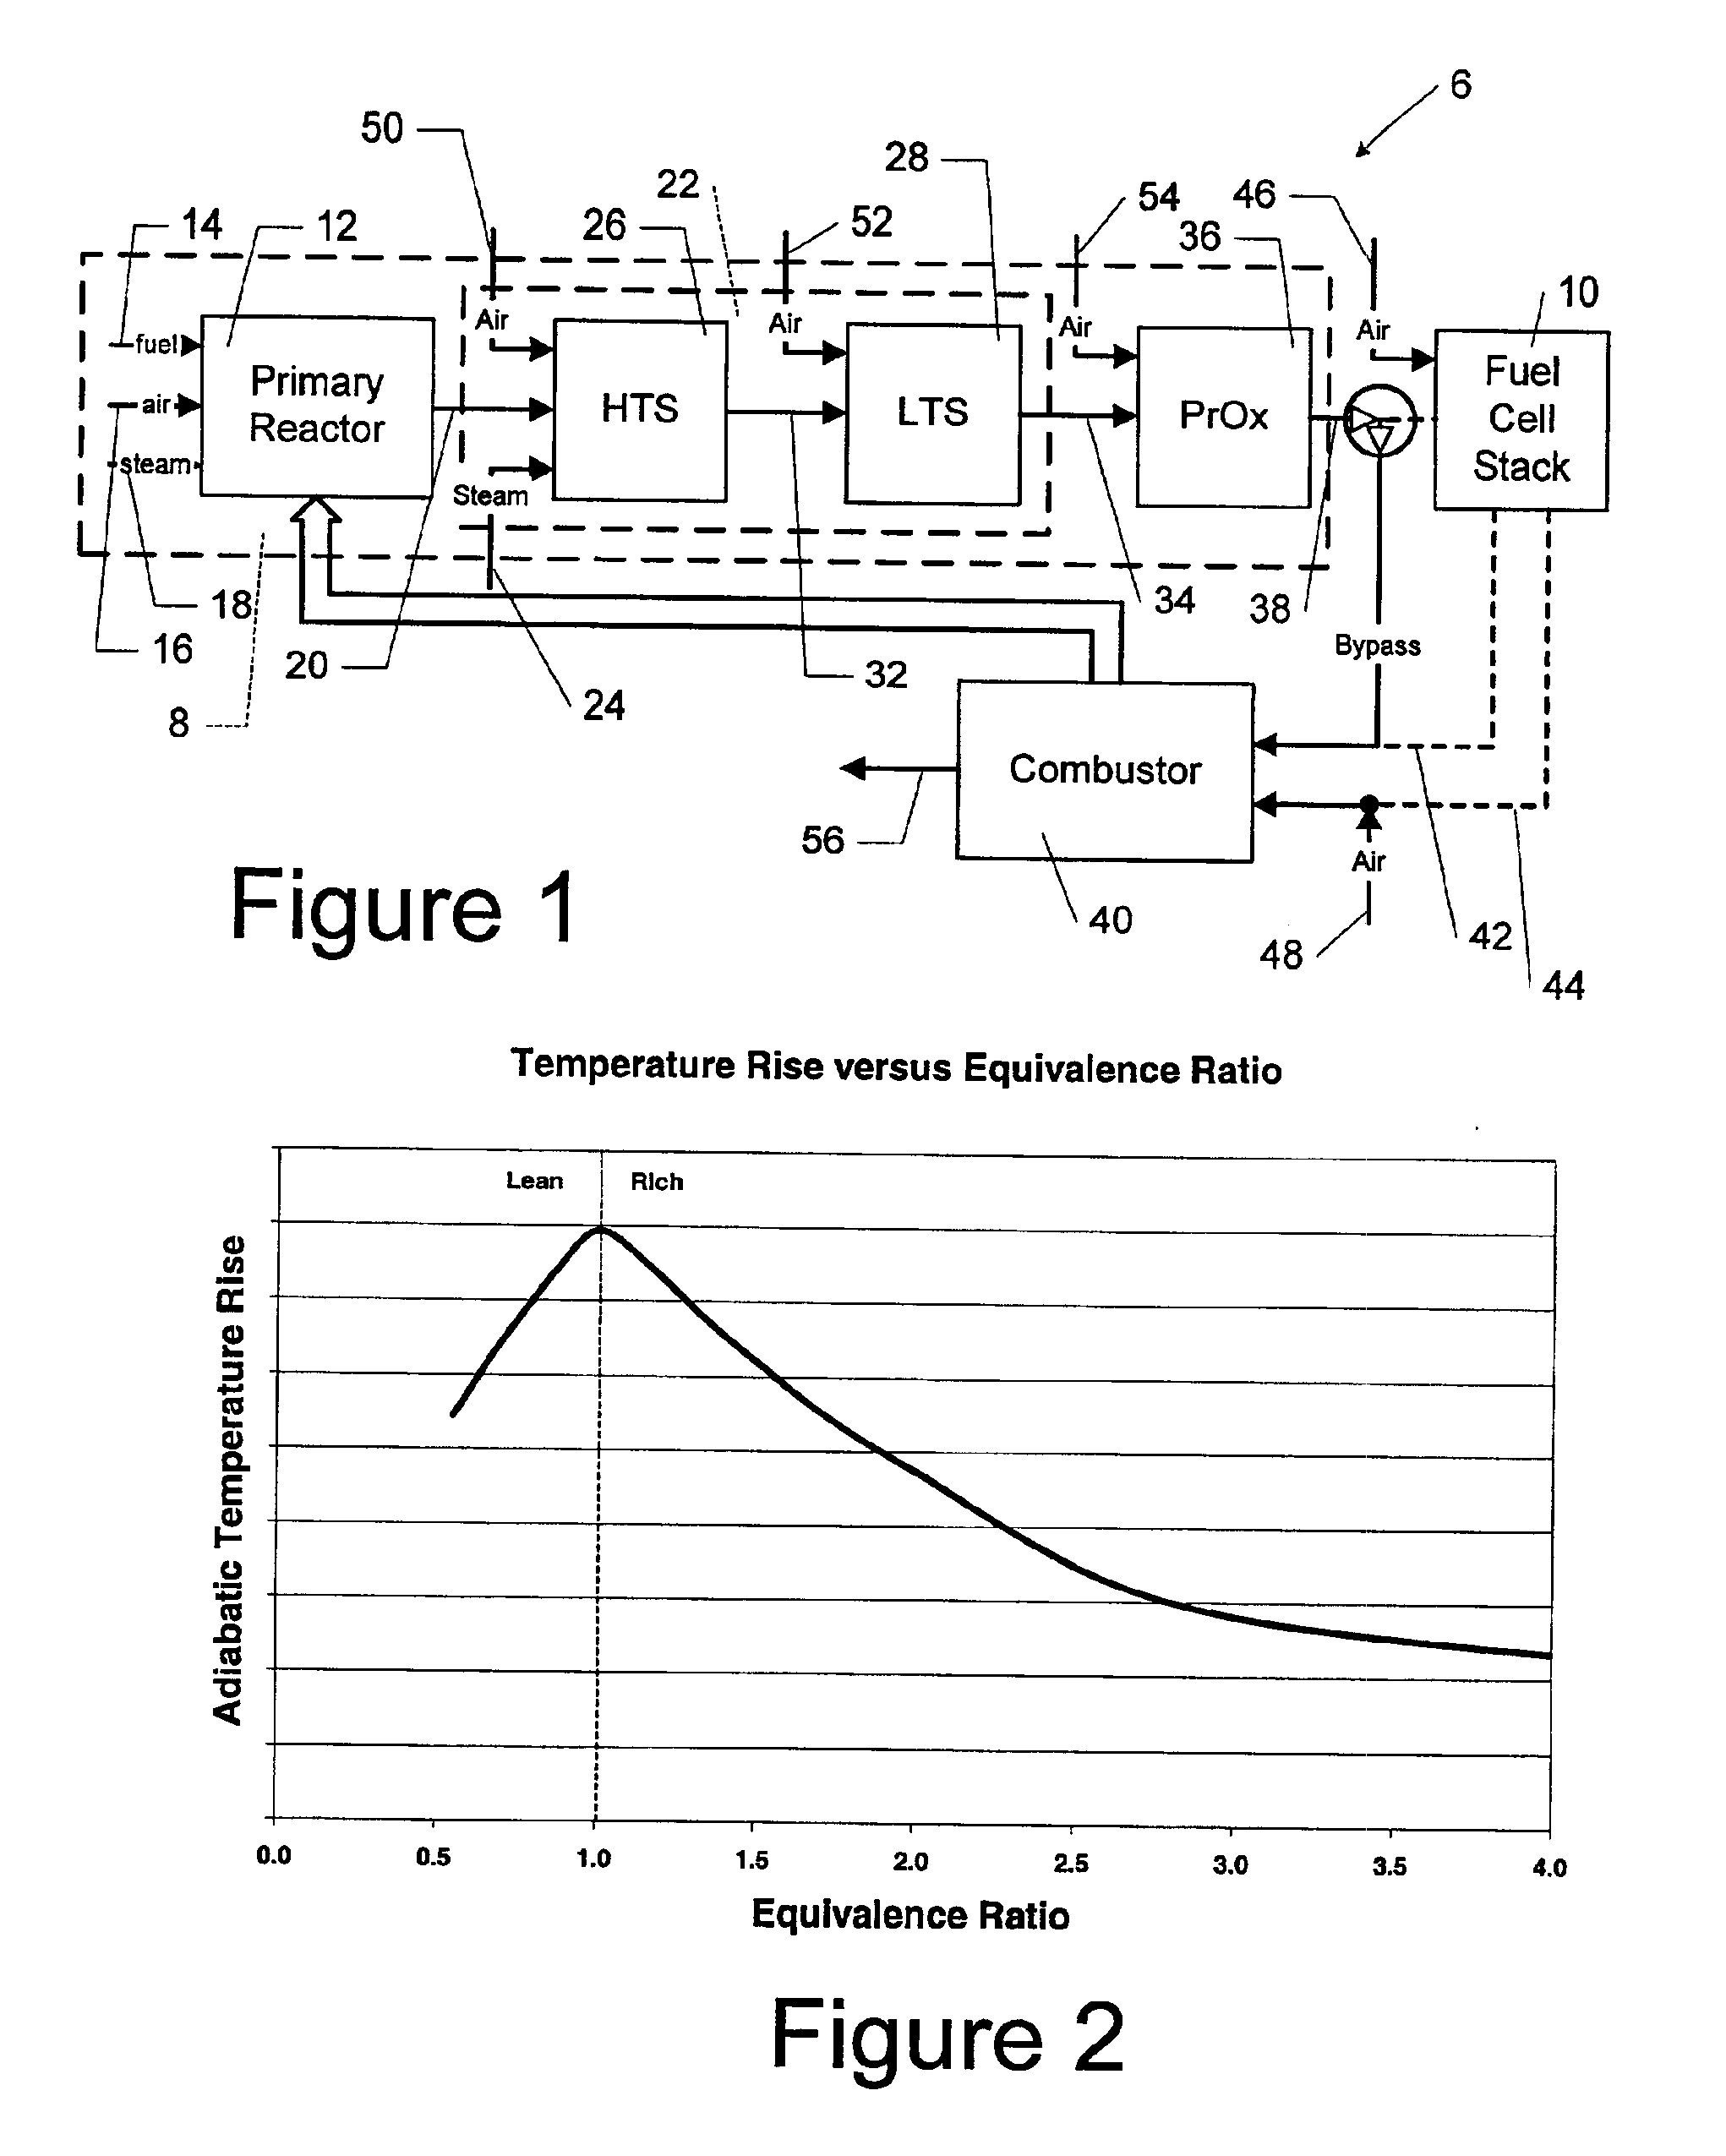 Method for quick start-up of a fuel processing system using controlled staged oxidation